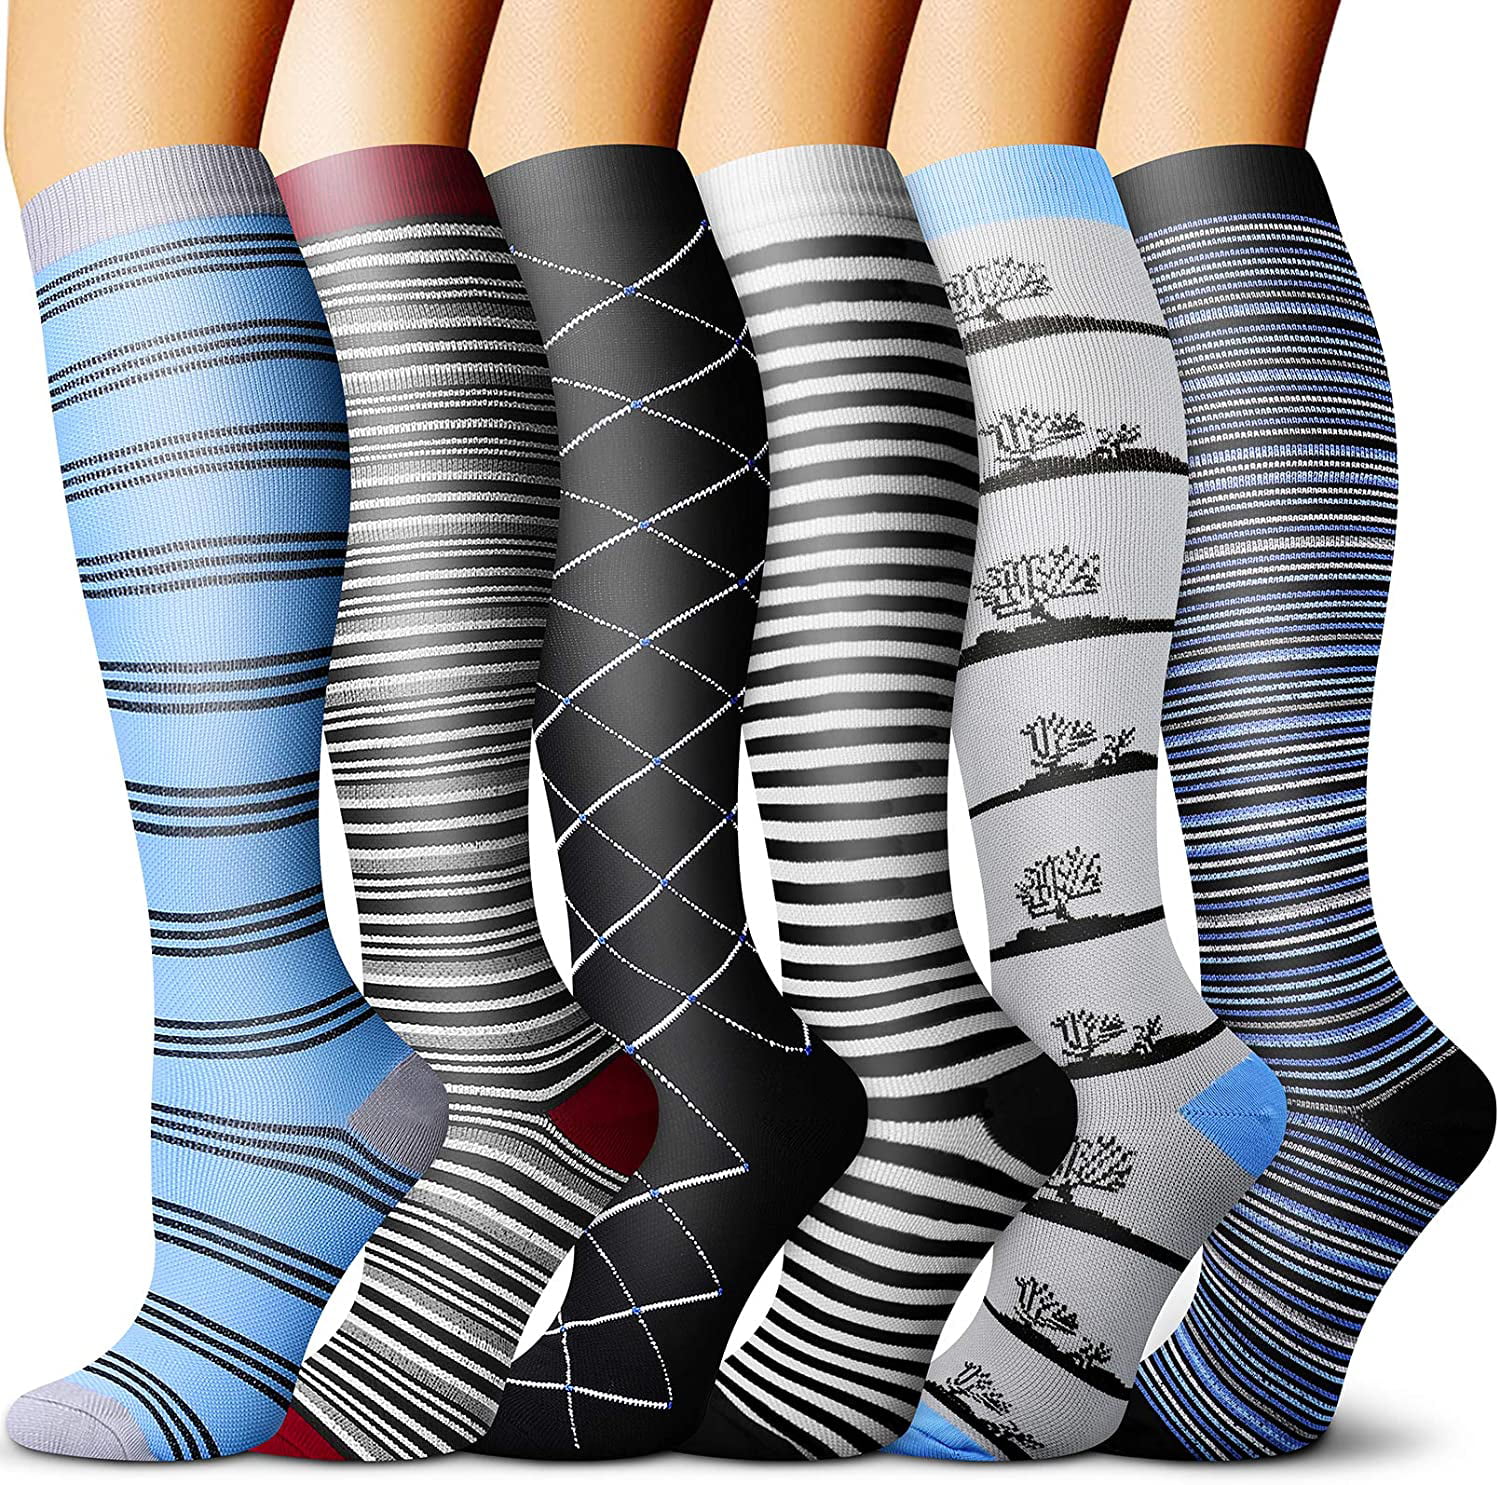 Mountaineering CHARMKING Compression Socks 15-20 mmHg is Best Graduated Athletic & Daily for Men & Women Running Travel